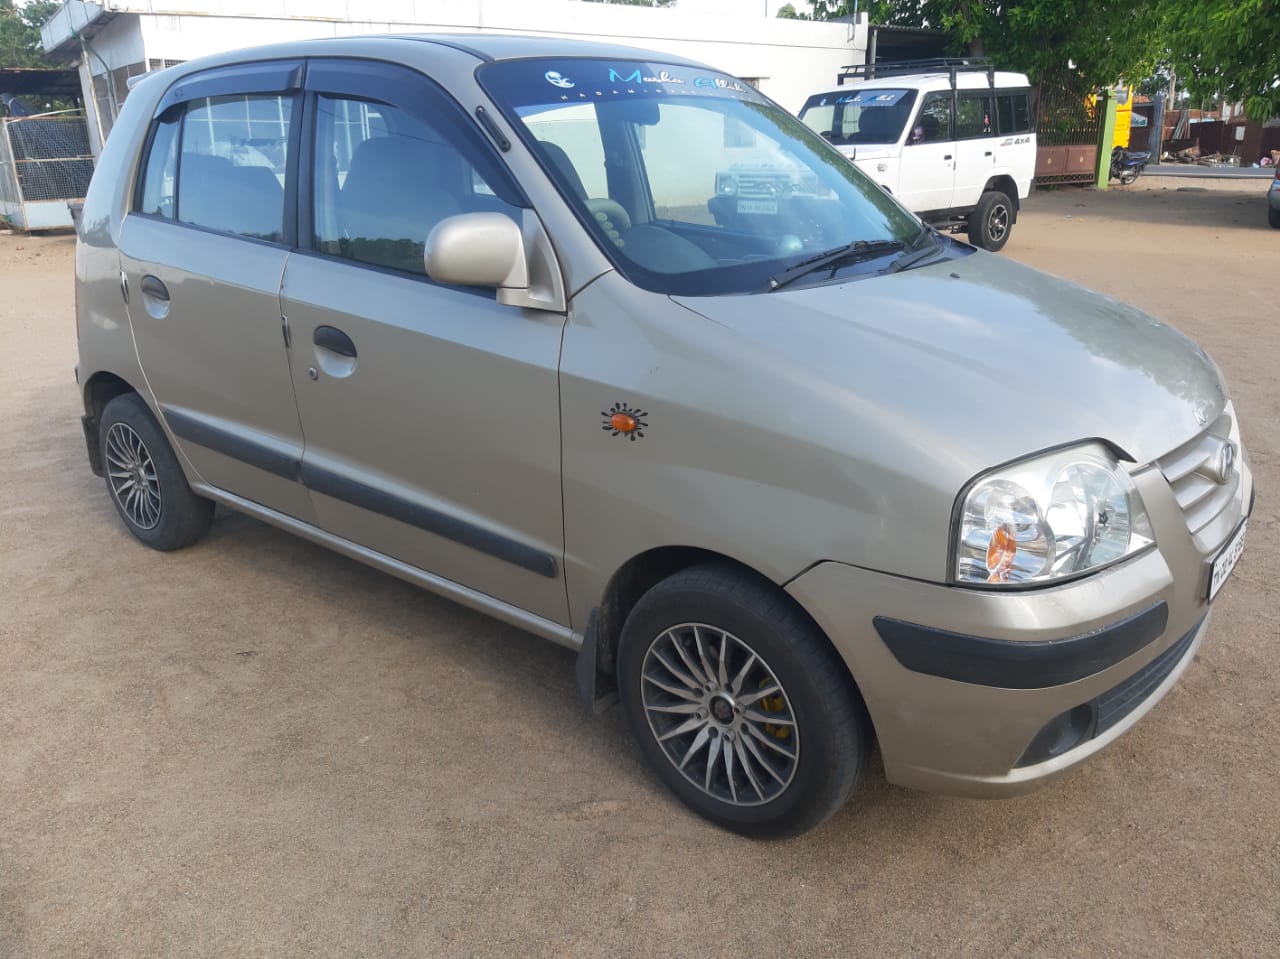 3879-for-sale-Hyundai-Santro-Xing-Petrol-First-Owner-2010-TN-registered-rs-225000